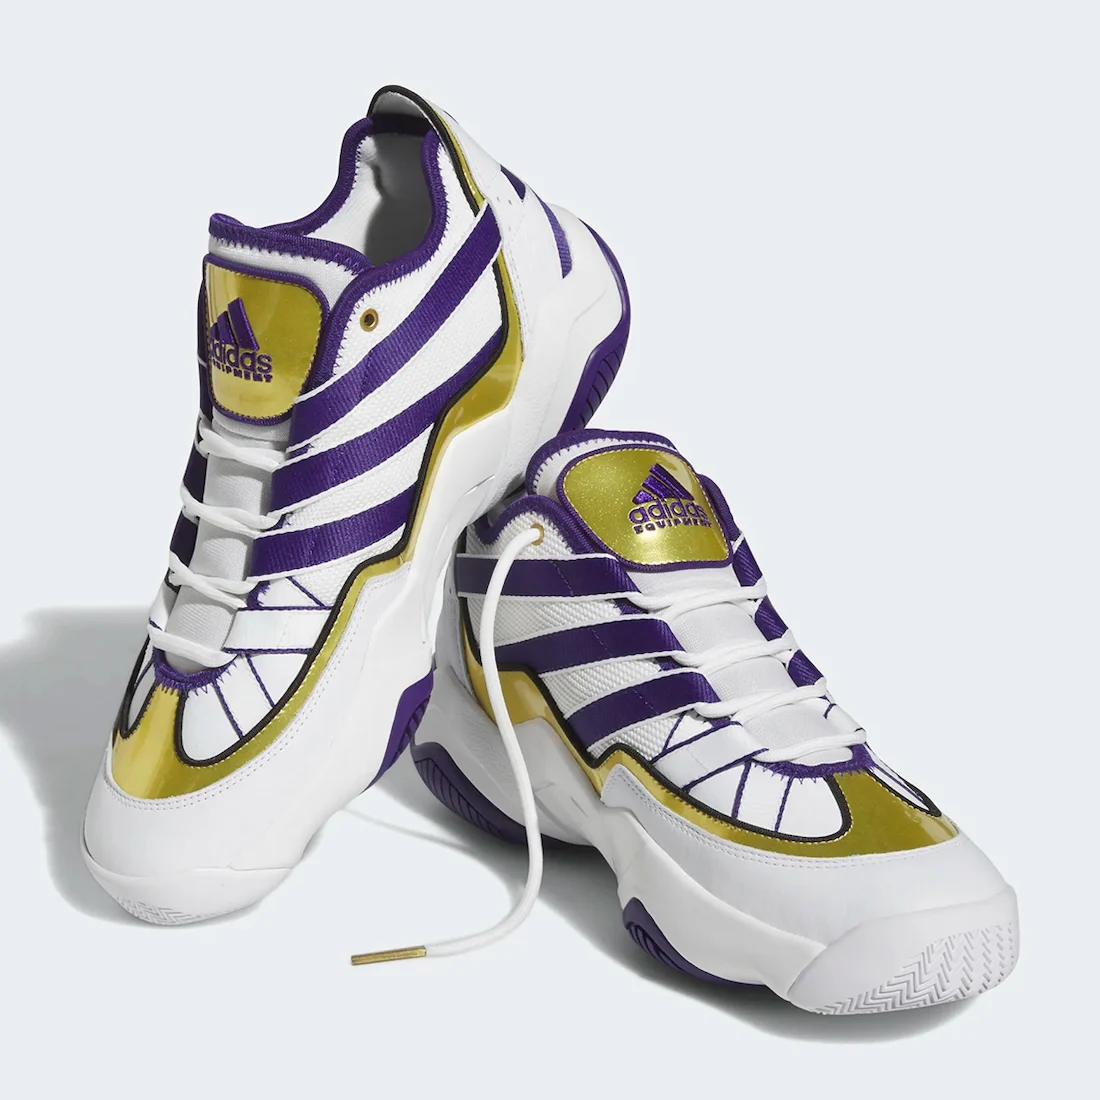 The adidas Top Ten 2010 is Back in Lakers' Purple and Gold | SoleSavy News